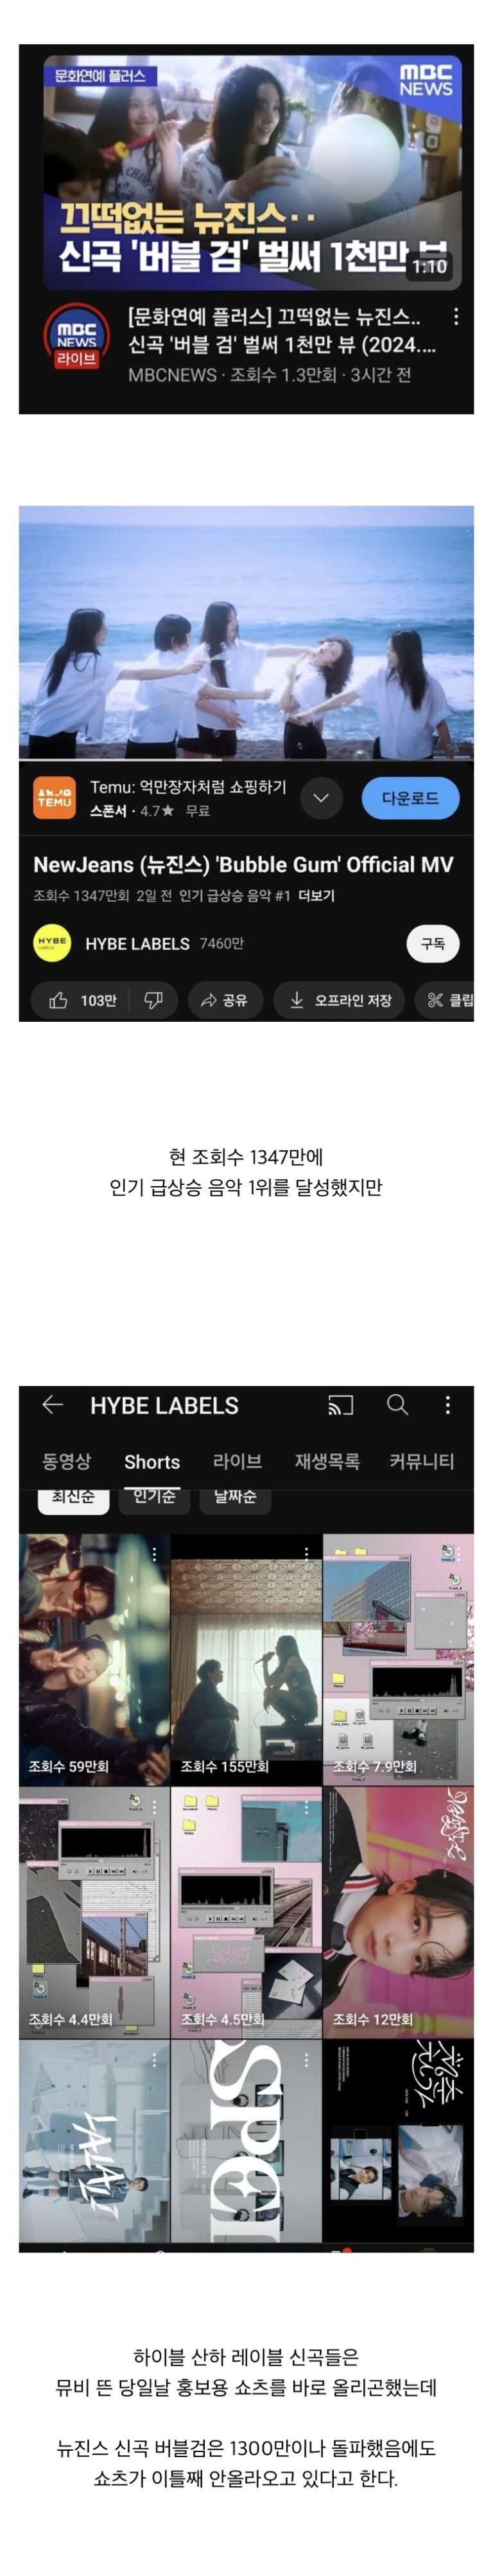 Min Heejin "This time make sure to check how HYBE is promoting NewJeans this time"